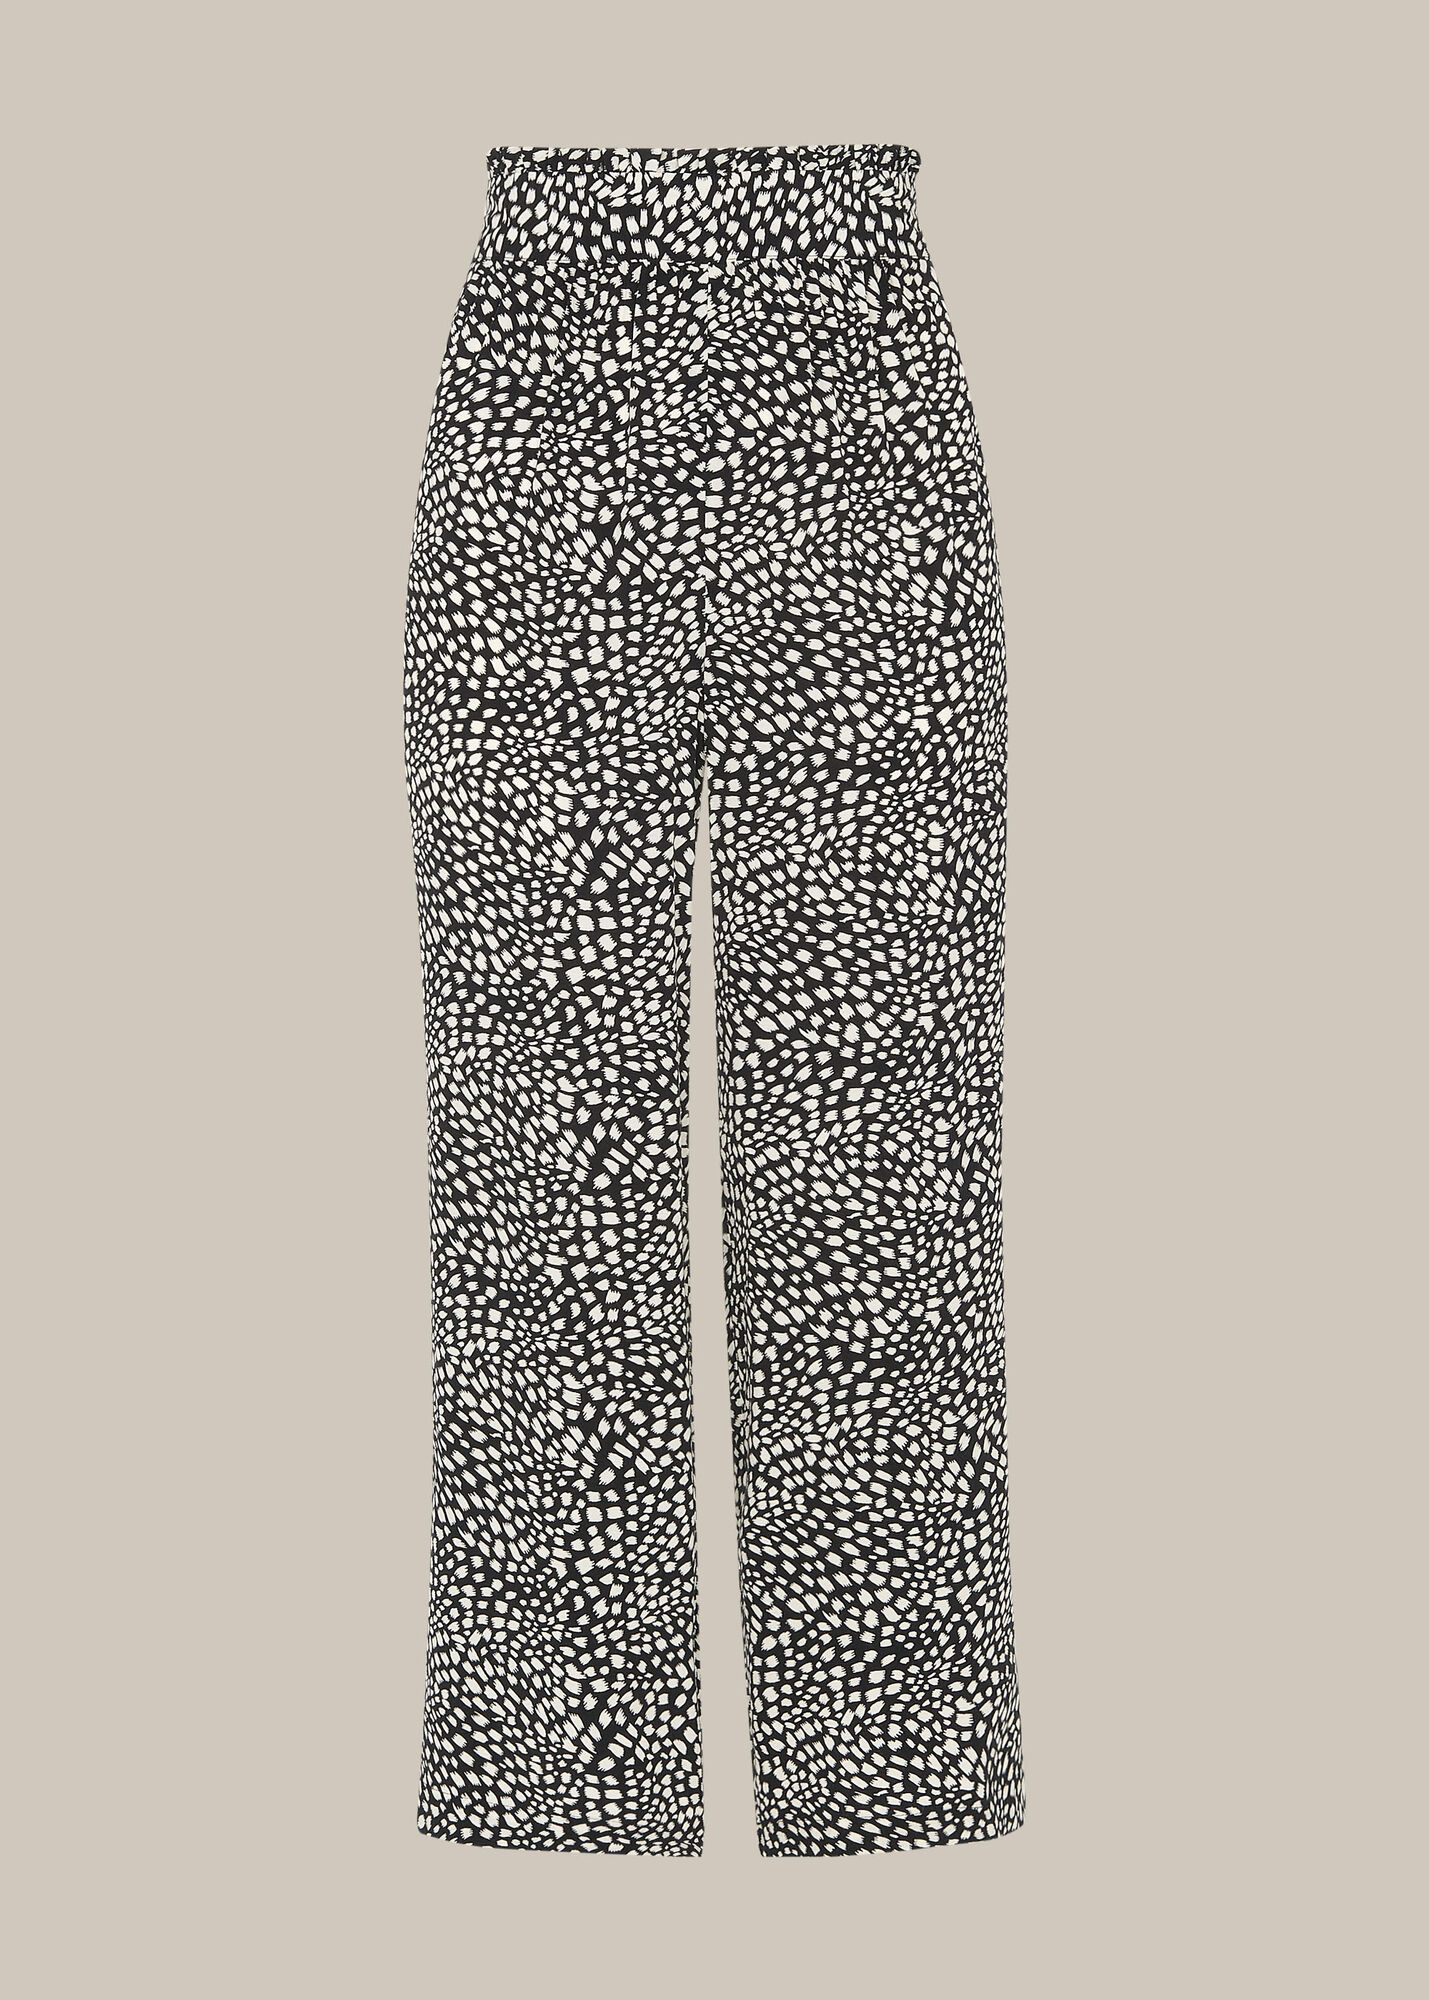 Multicolour Spotted Animal Trouser | WHISTLES